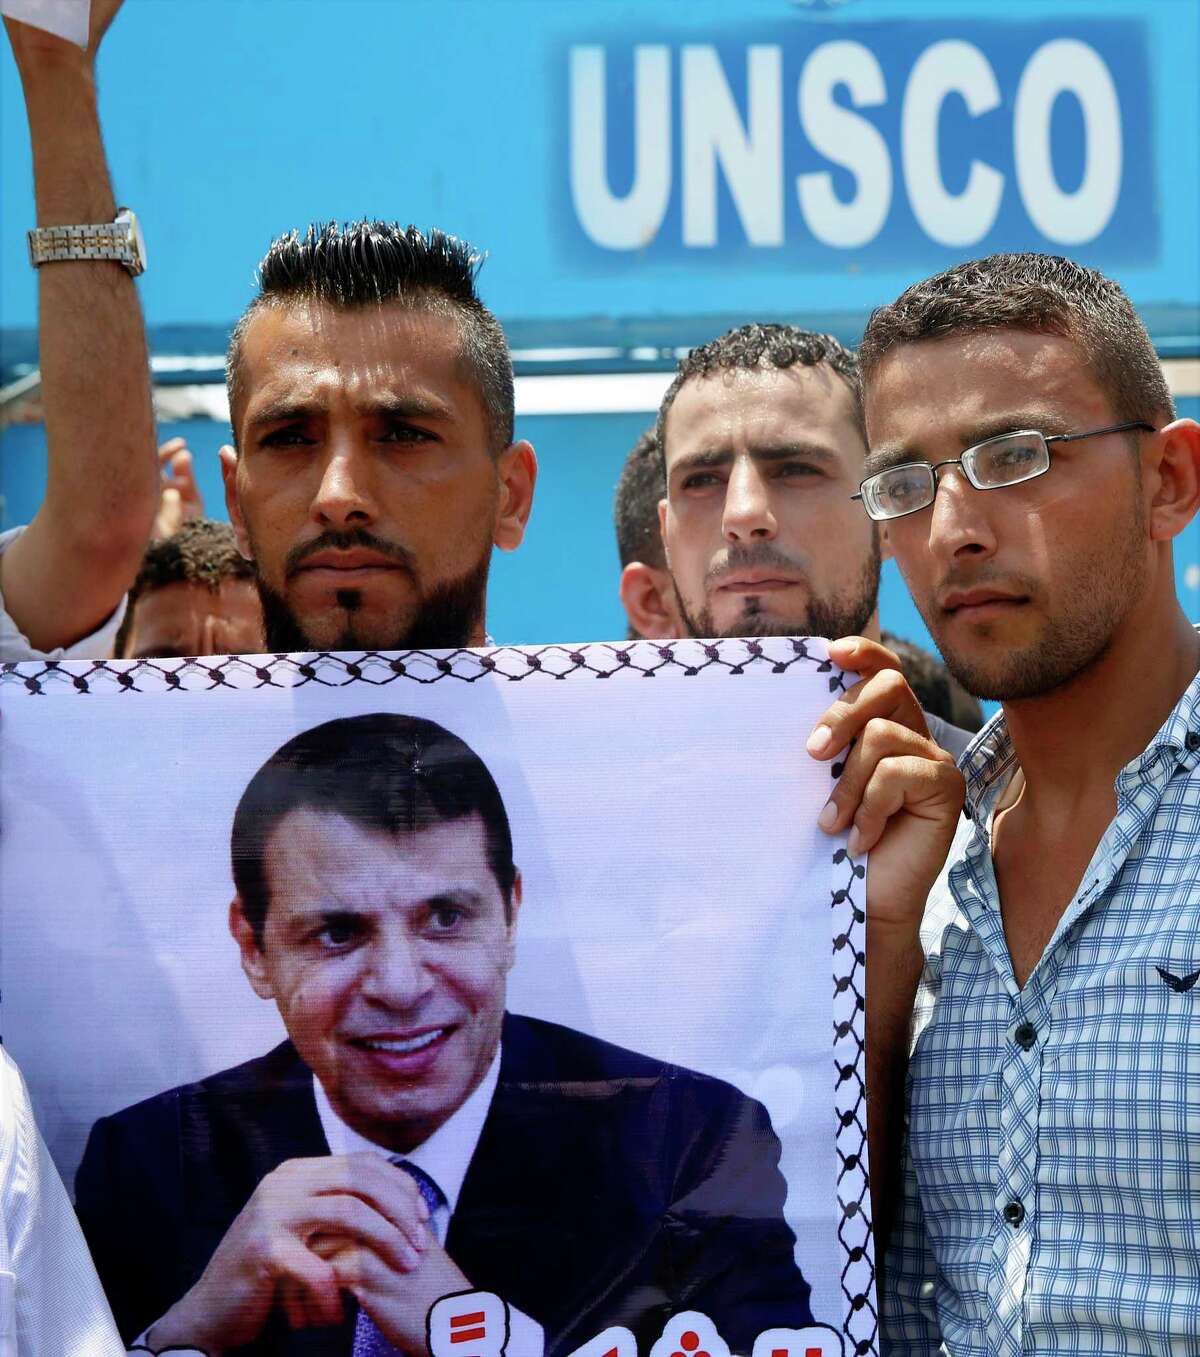 Supporters hold a photo of exiled former Gaza strongman Mohammed Dahlan during a protest against metal detectors that Israel has installed at the Al-Aqsa Mosque compound in Jerusalem, in Gaza City, Thursday, July 20, 2017. A Gaza power-sharing deal between Dahlan and Hamas, two former arch foes, is slowly taking shape on the ground and could lead to big changes in the Hamas-ruled territory, including an easing of a decade-long border blockade. (AP Photo/Adel Hana)